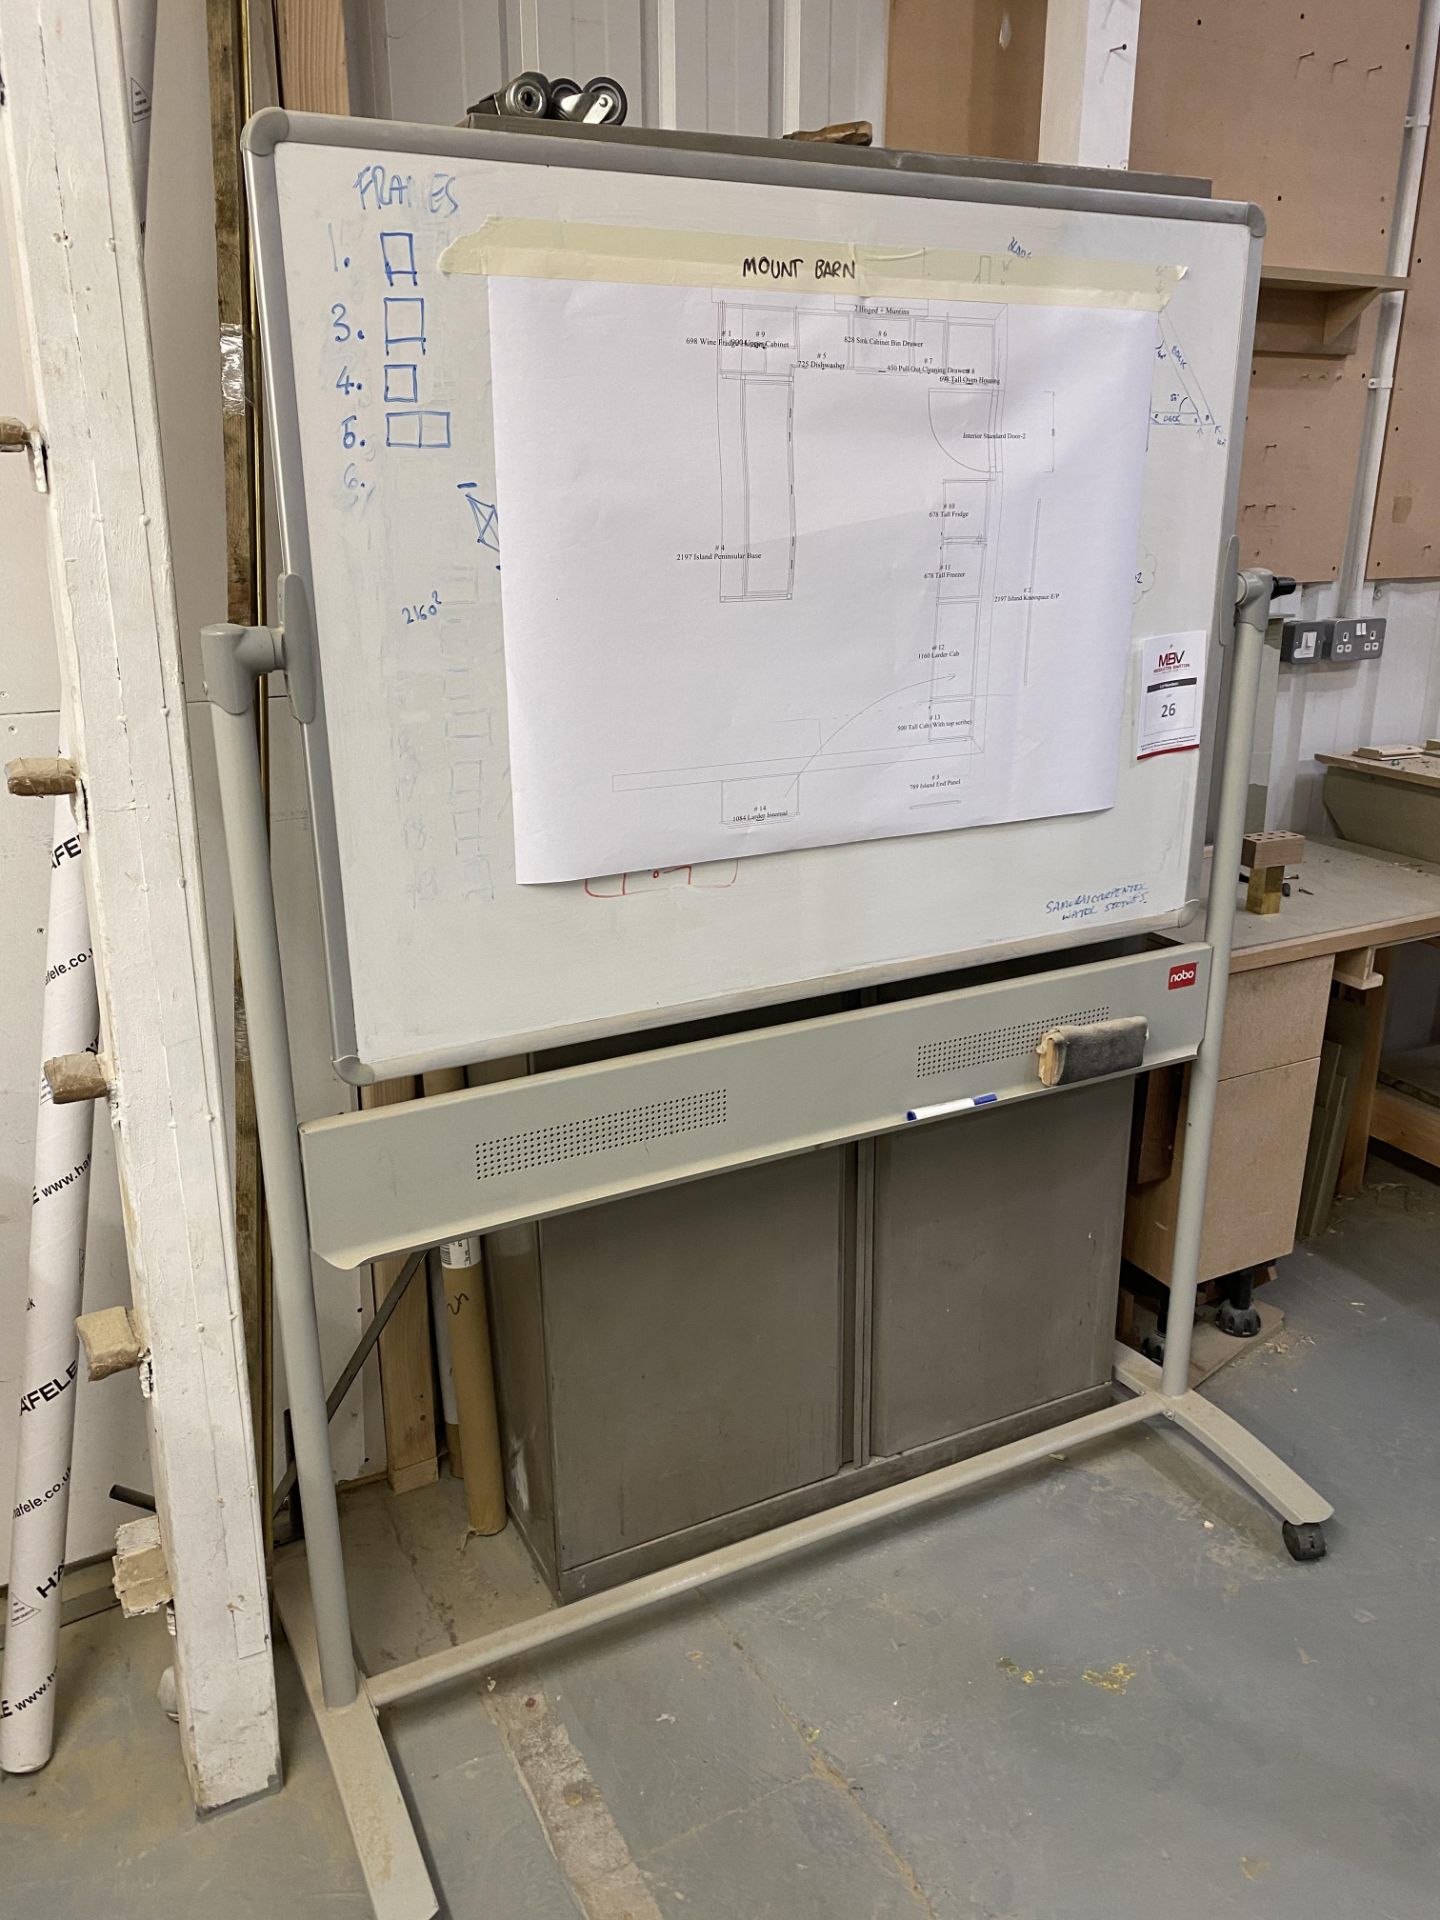 Whiteboard on frame, Metal Stationery Cabinet and Contents.